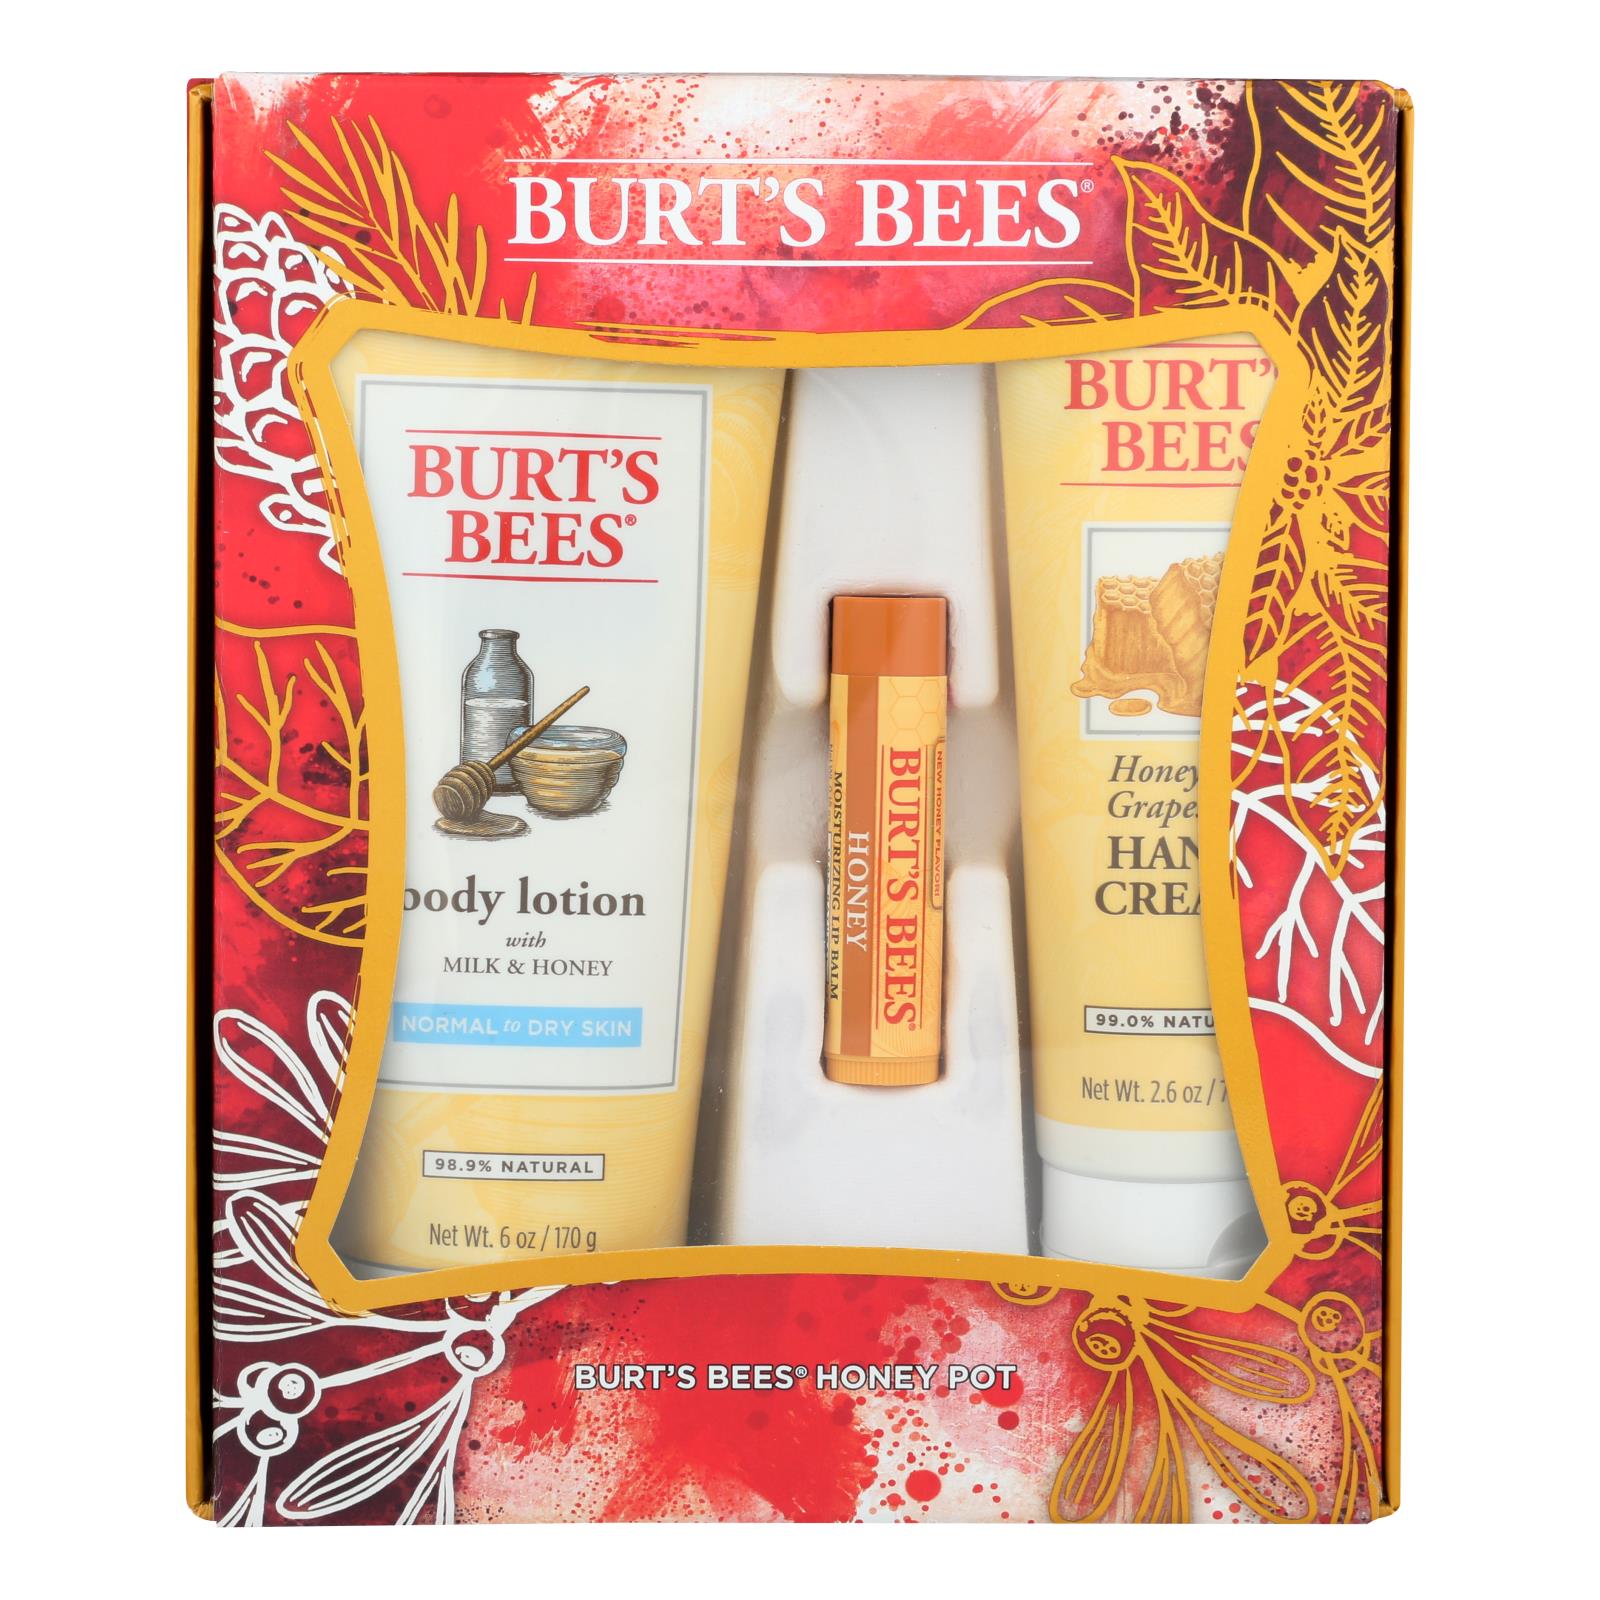 Burts Bees - Gift Pack Honey Pot - Case of 4 - 1 CT